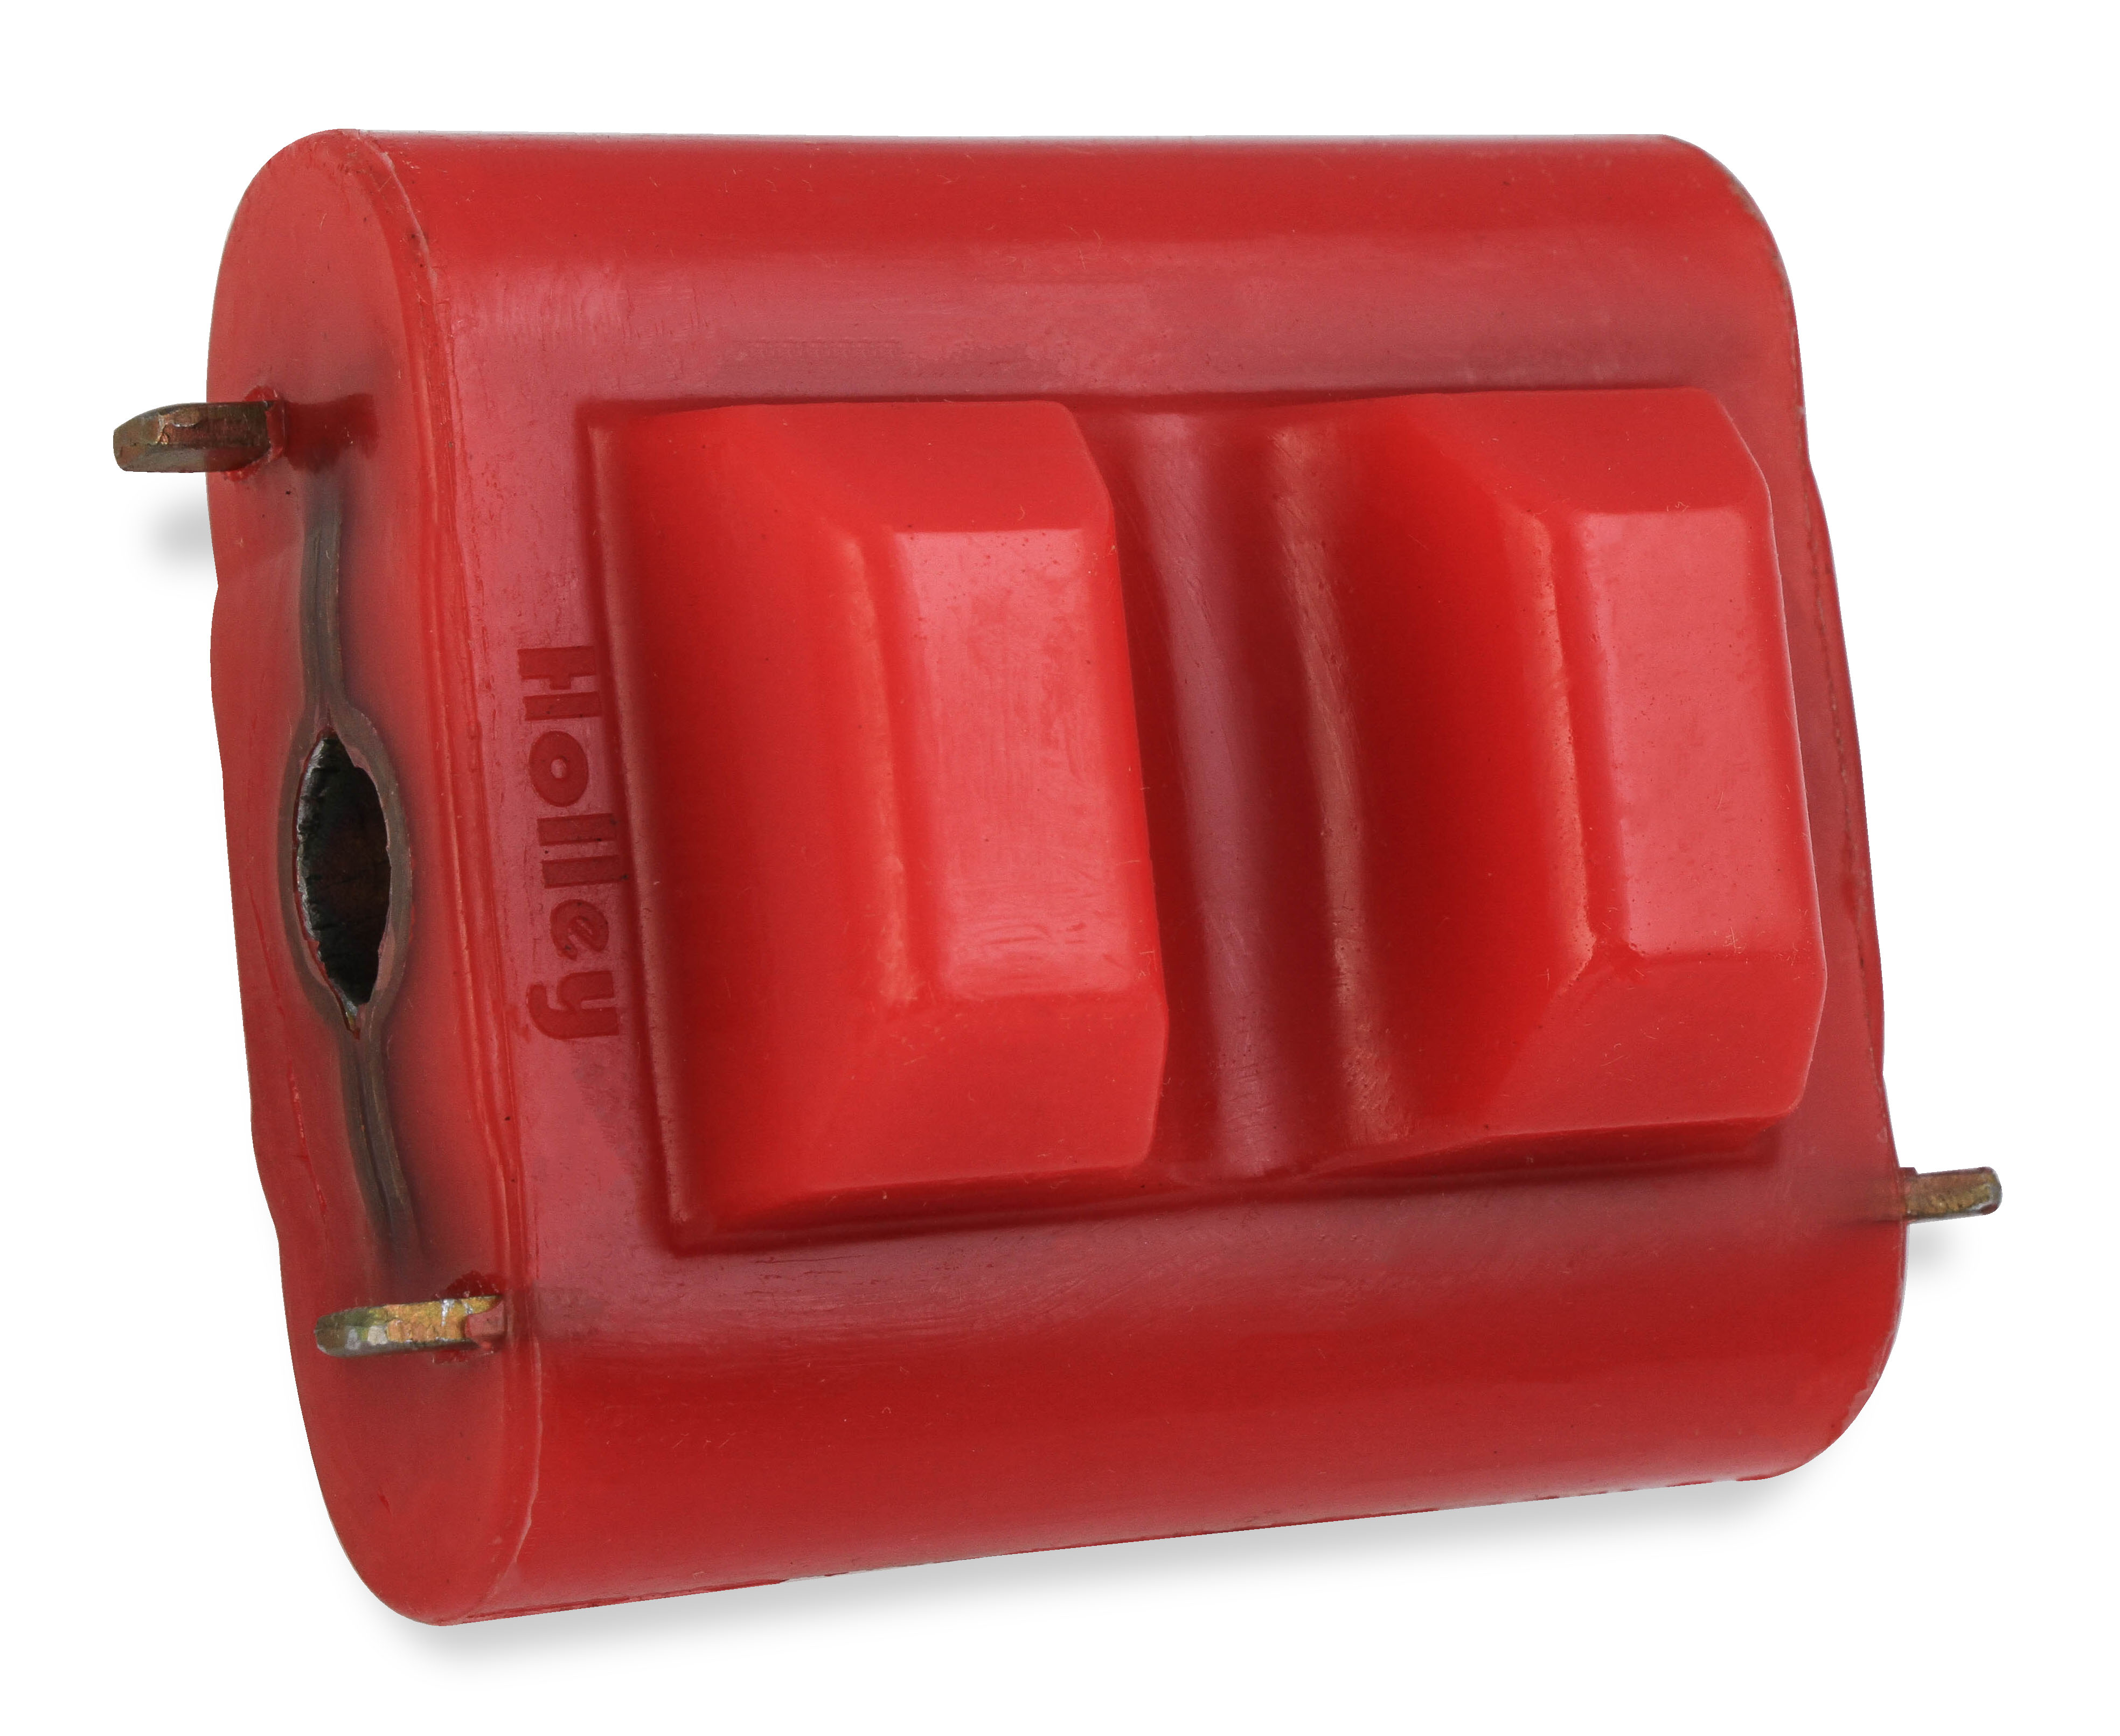 Details about   Small Block Big Block Chevy Motor Mounts Red Urethane High Performance 1 Pair